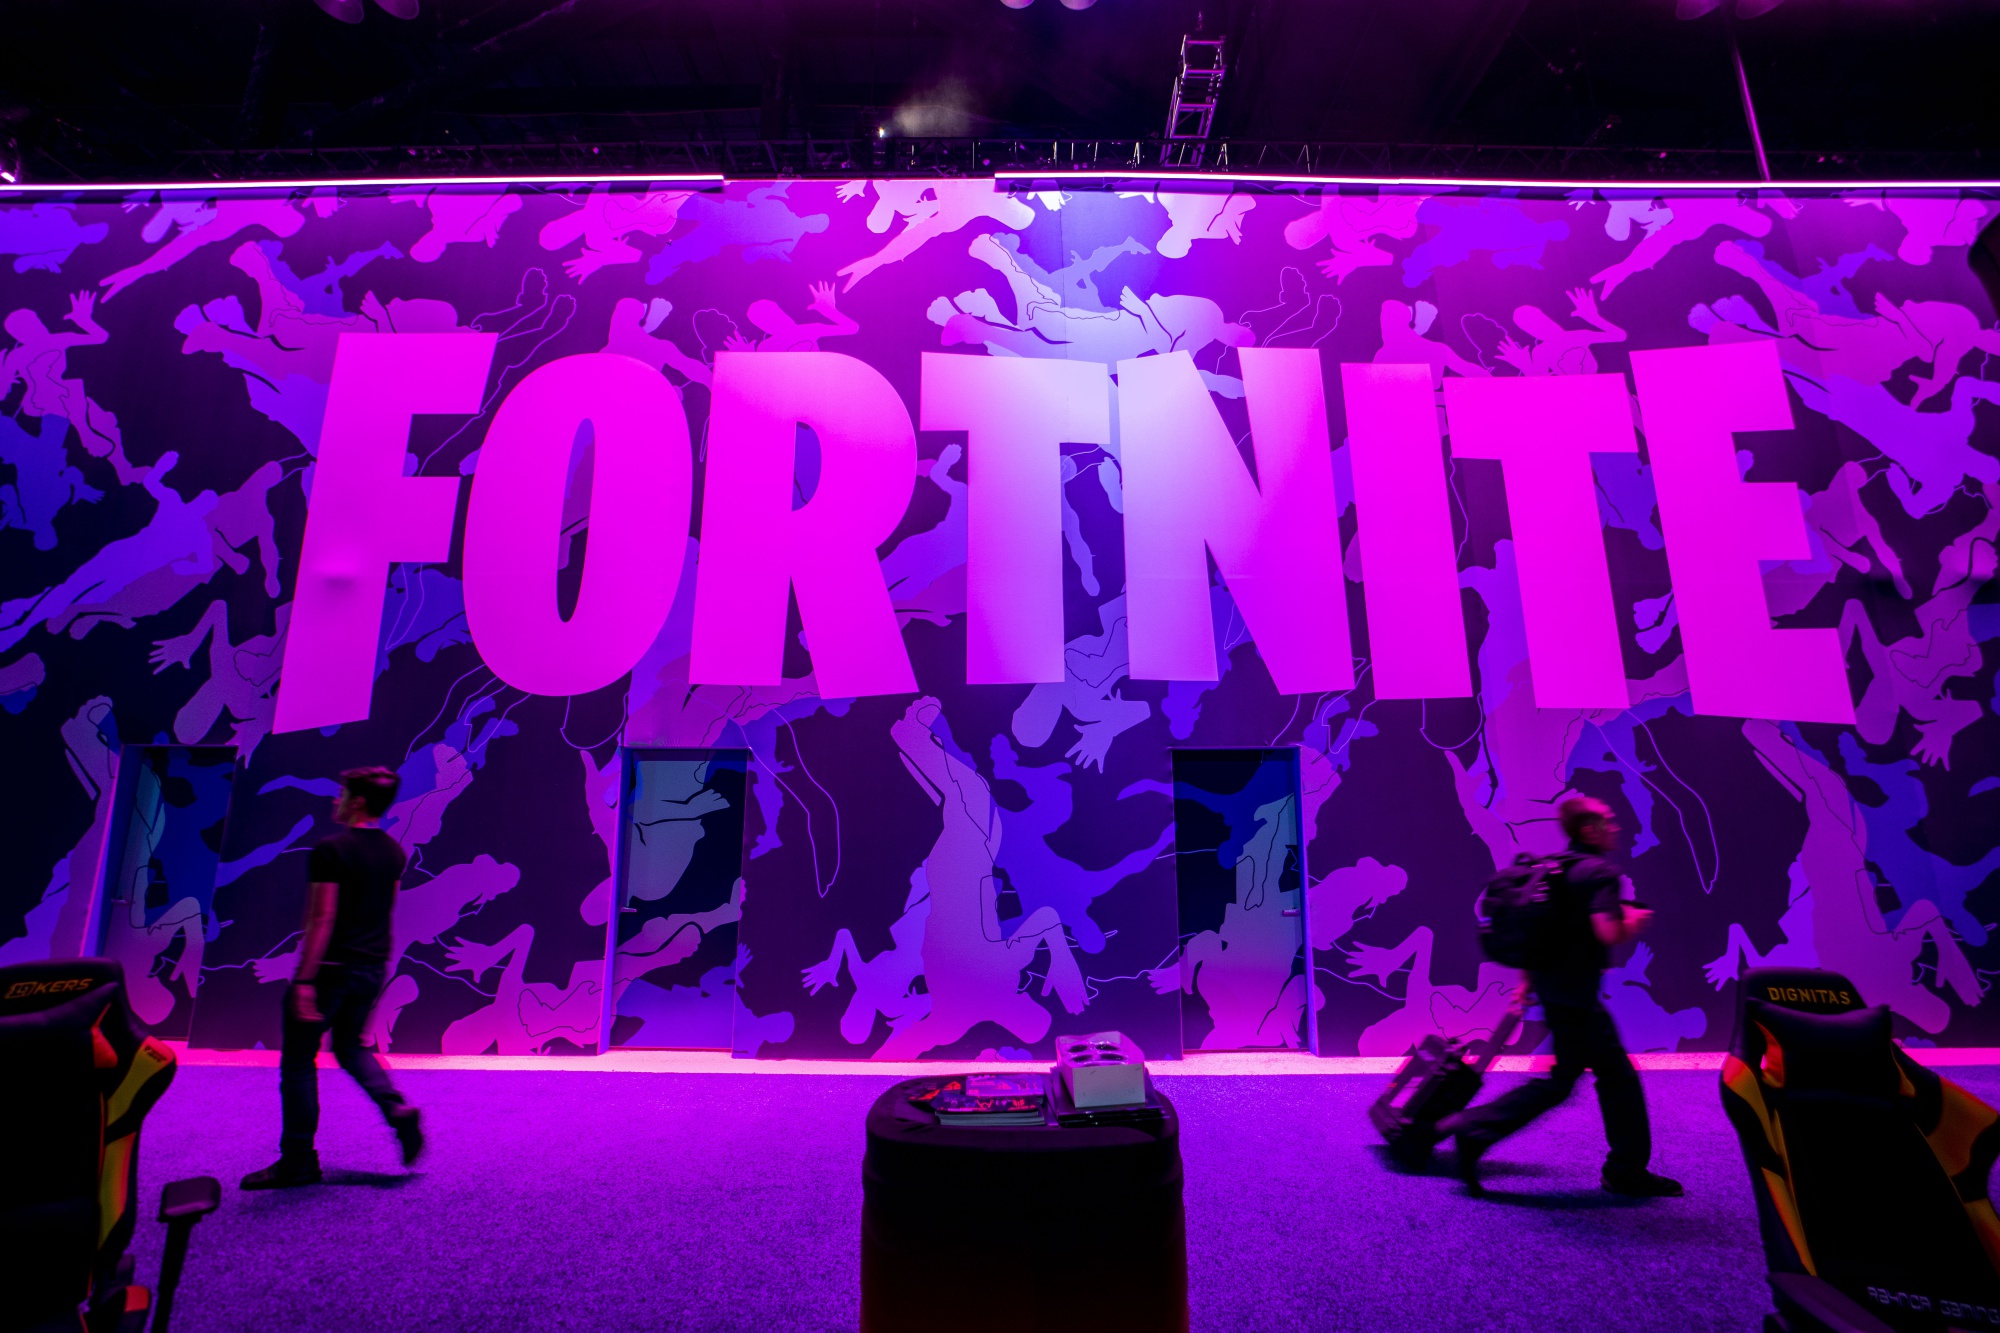 Both Epic Games and Microsoft to donate Fortnite proceeds to